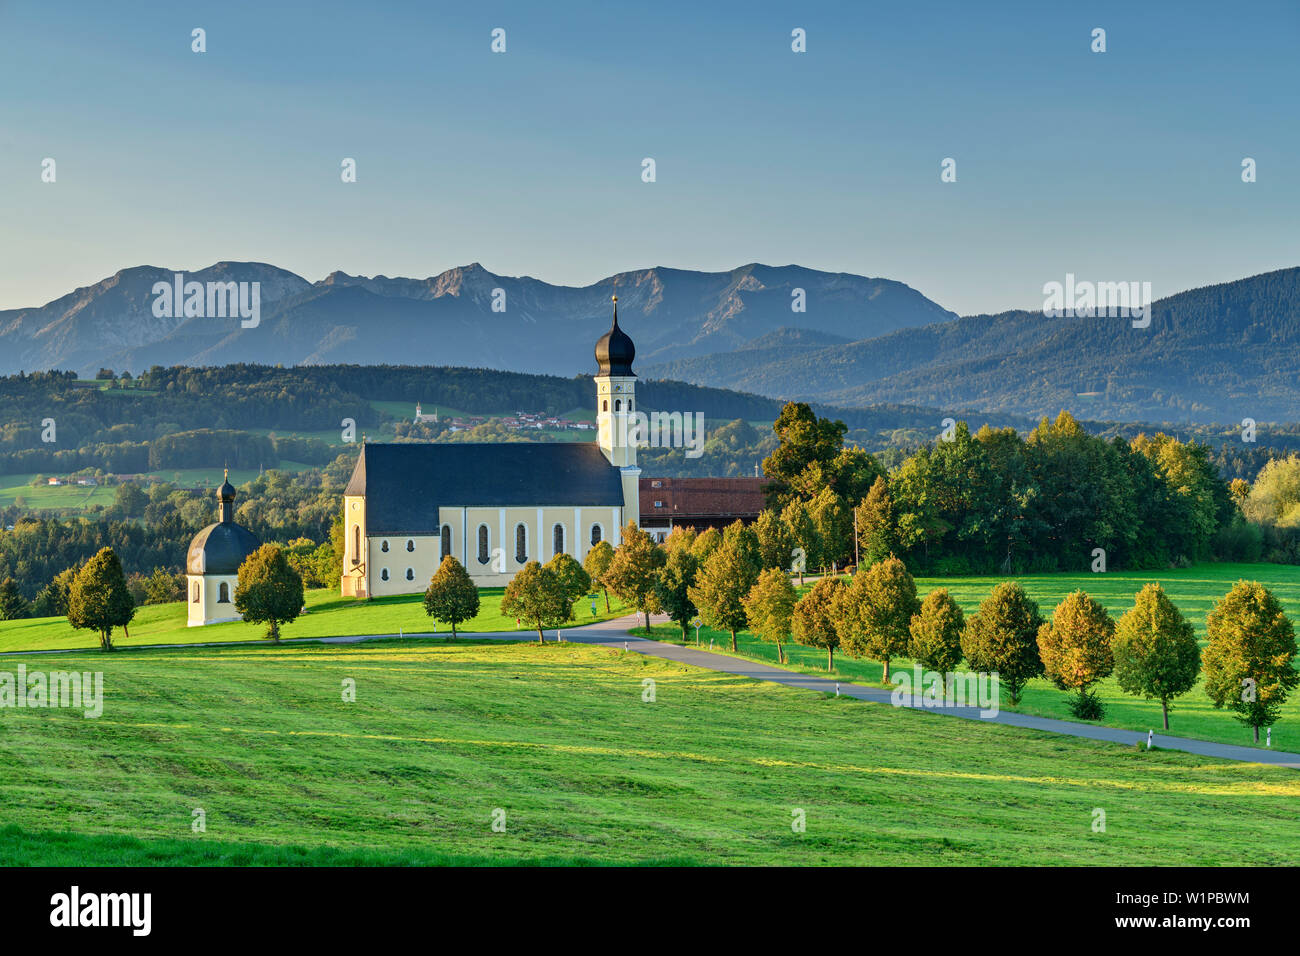 Church of wilparting with mangfall mountains in the background, Wilparting, Sunderland, Upper Bavaria, Bavaria, Germany Stock Photo